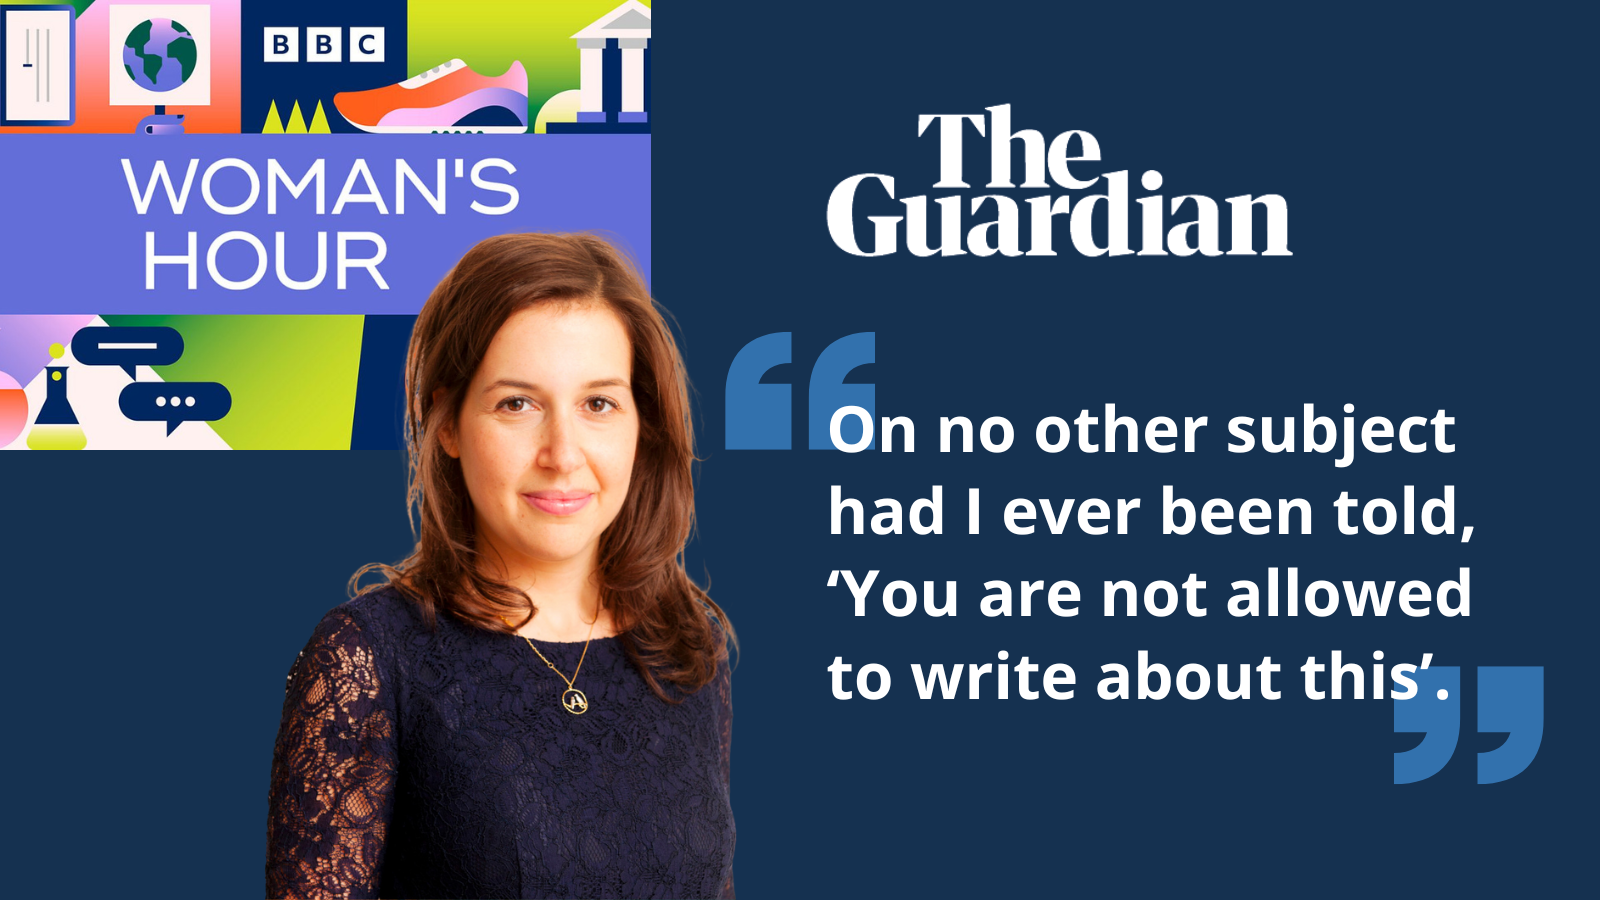 "On no other subject had I ever been told, ‘You are not allowed to write about this’."